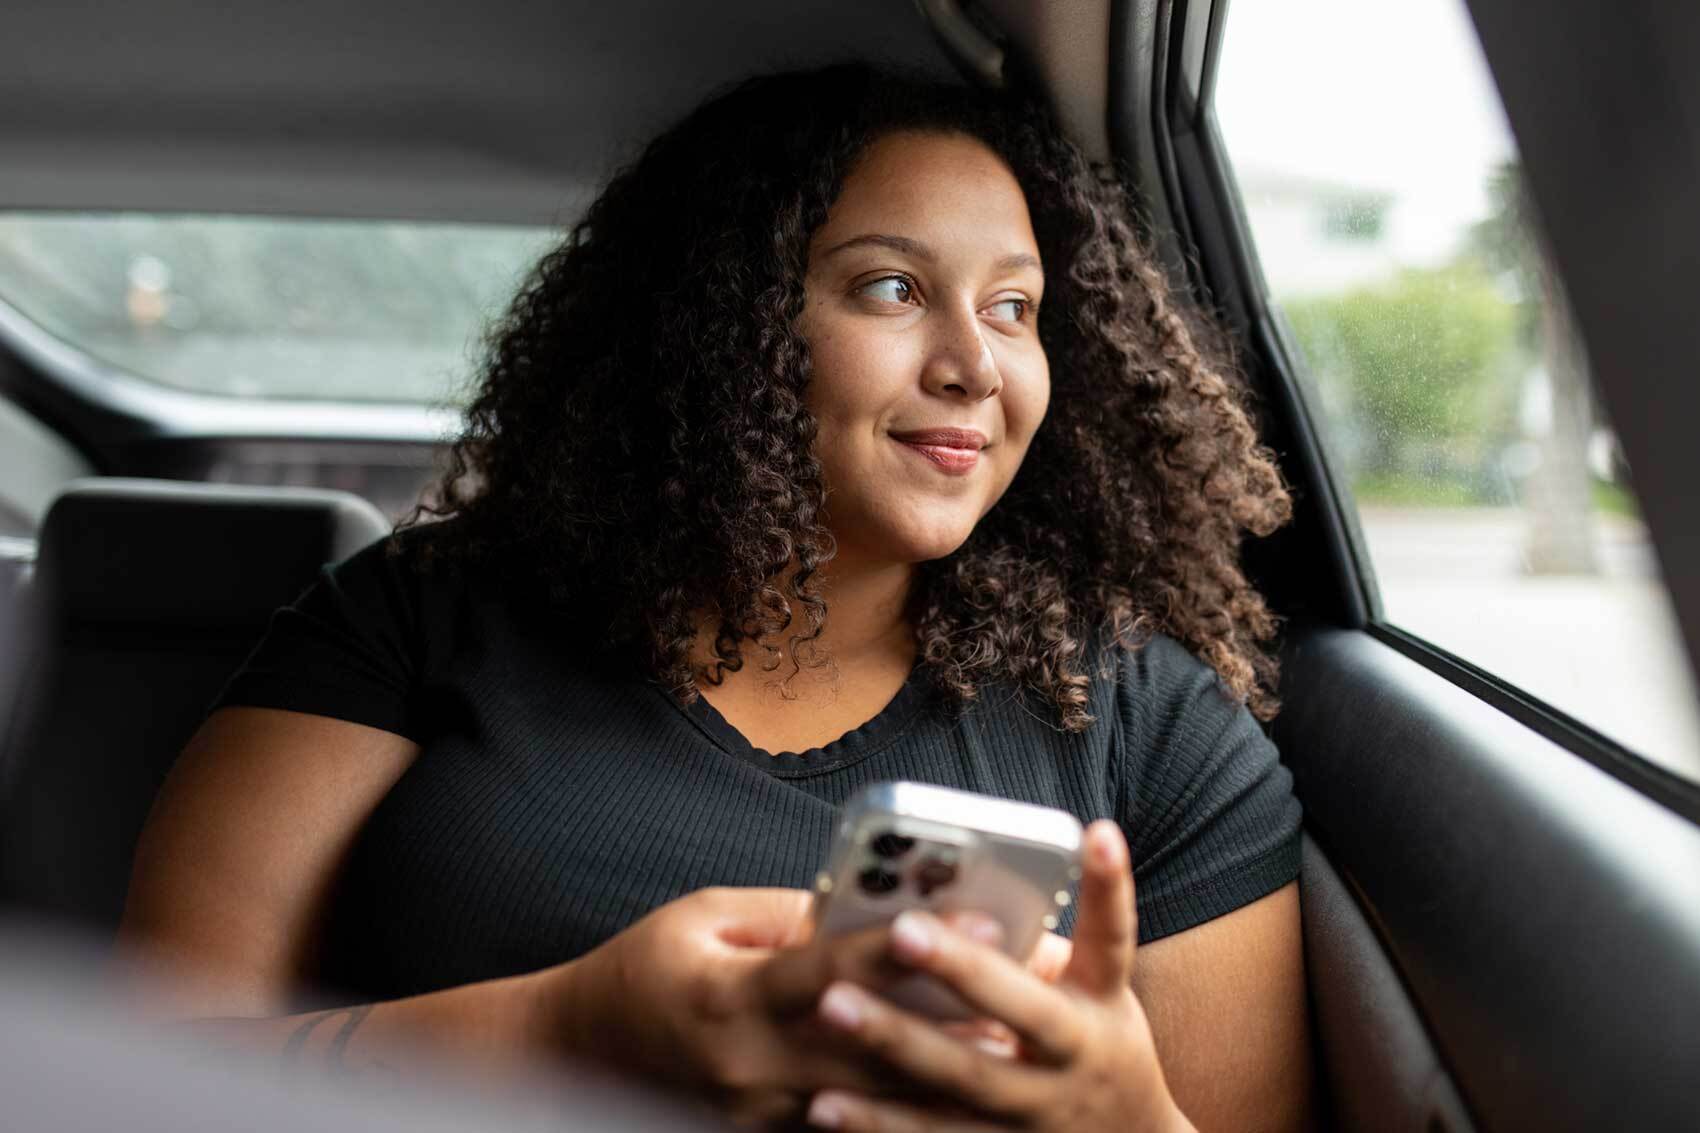 Smiling person sitting in parked car looking out the window while holding a phone